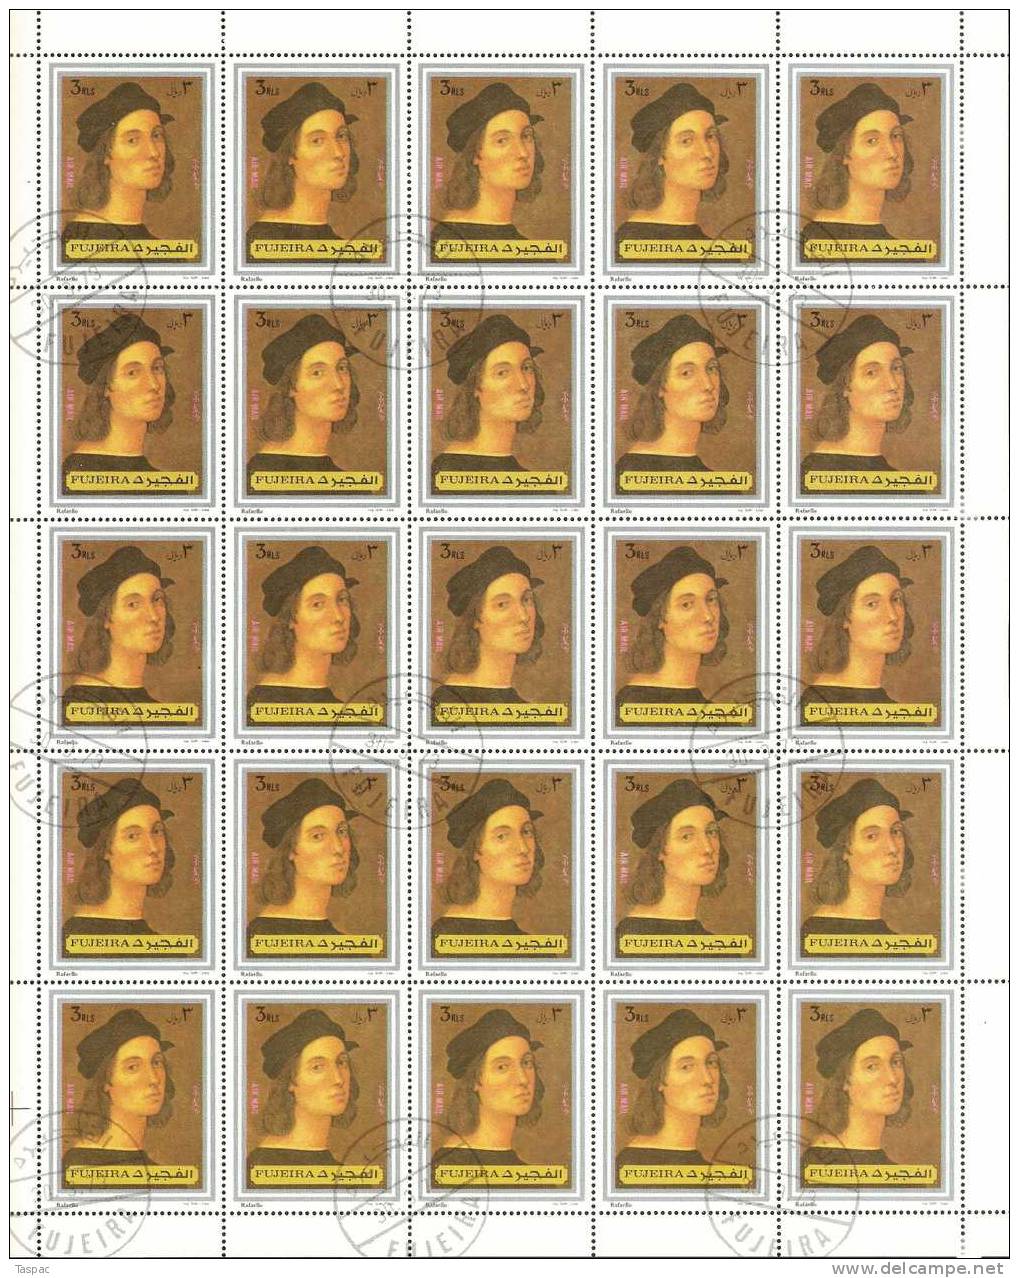 Fujeira 1972 Mi# 1371-1377 A Used - Sheets of  25 - Famous Paintings